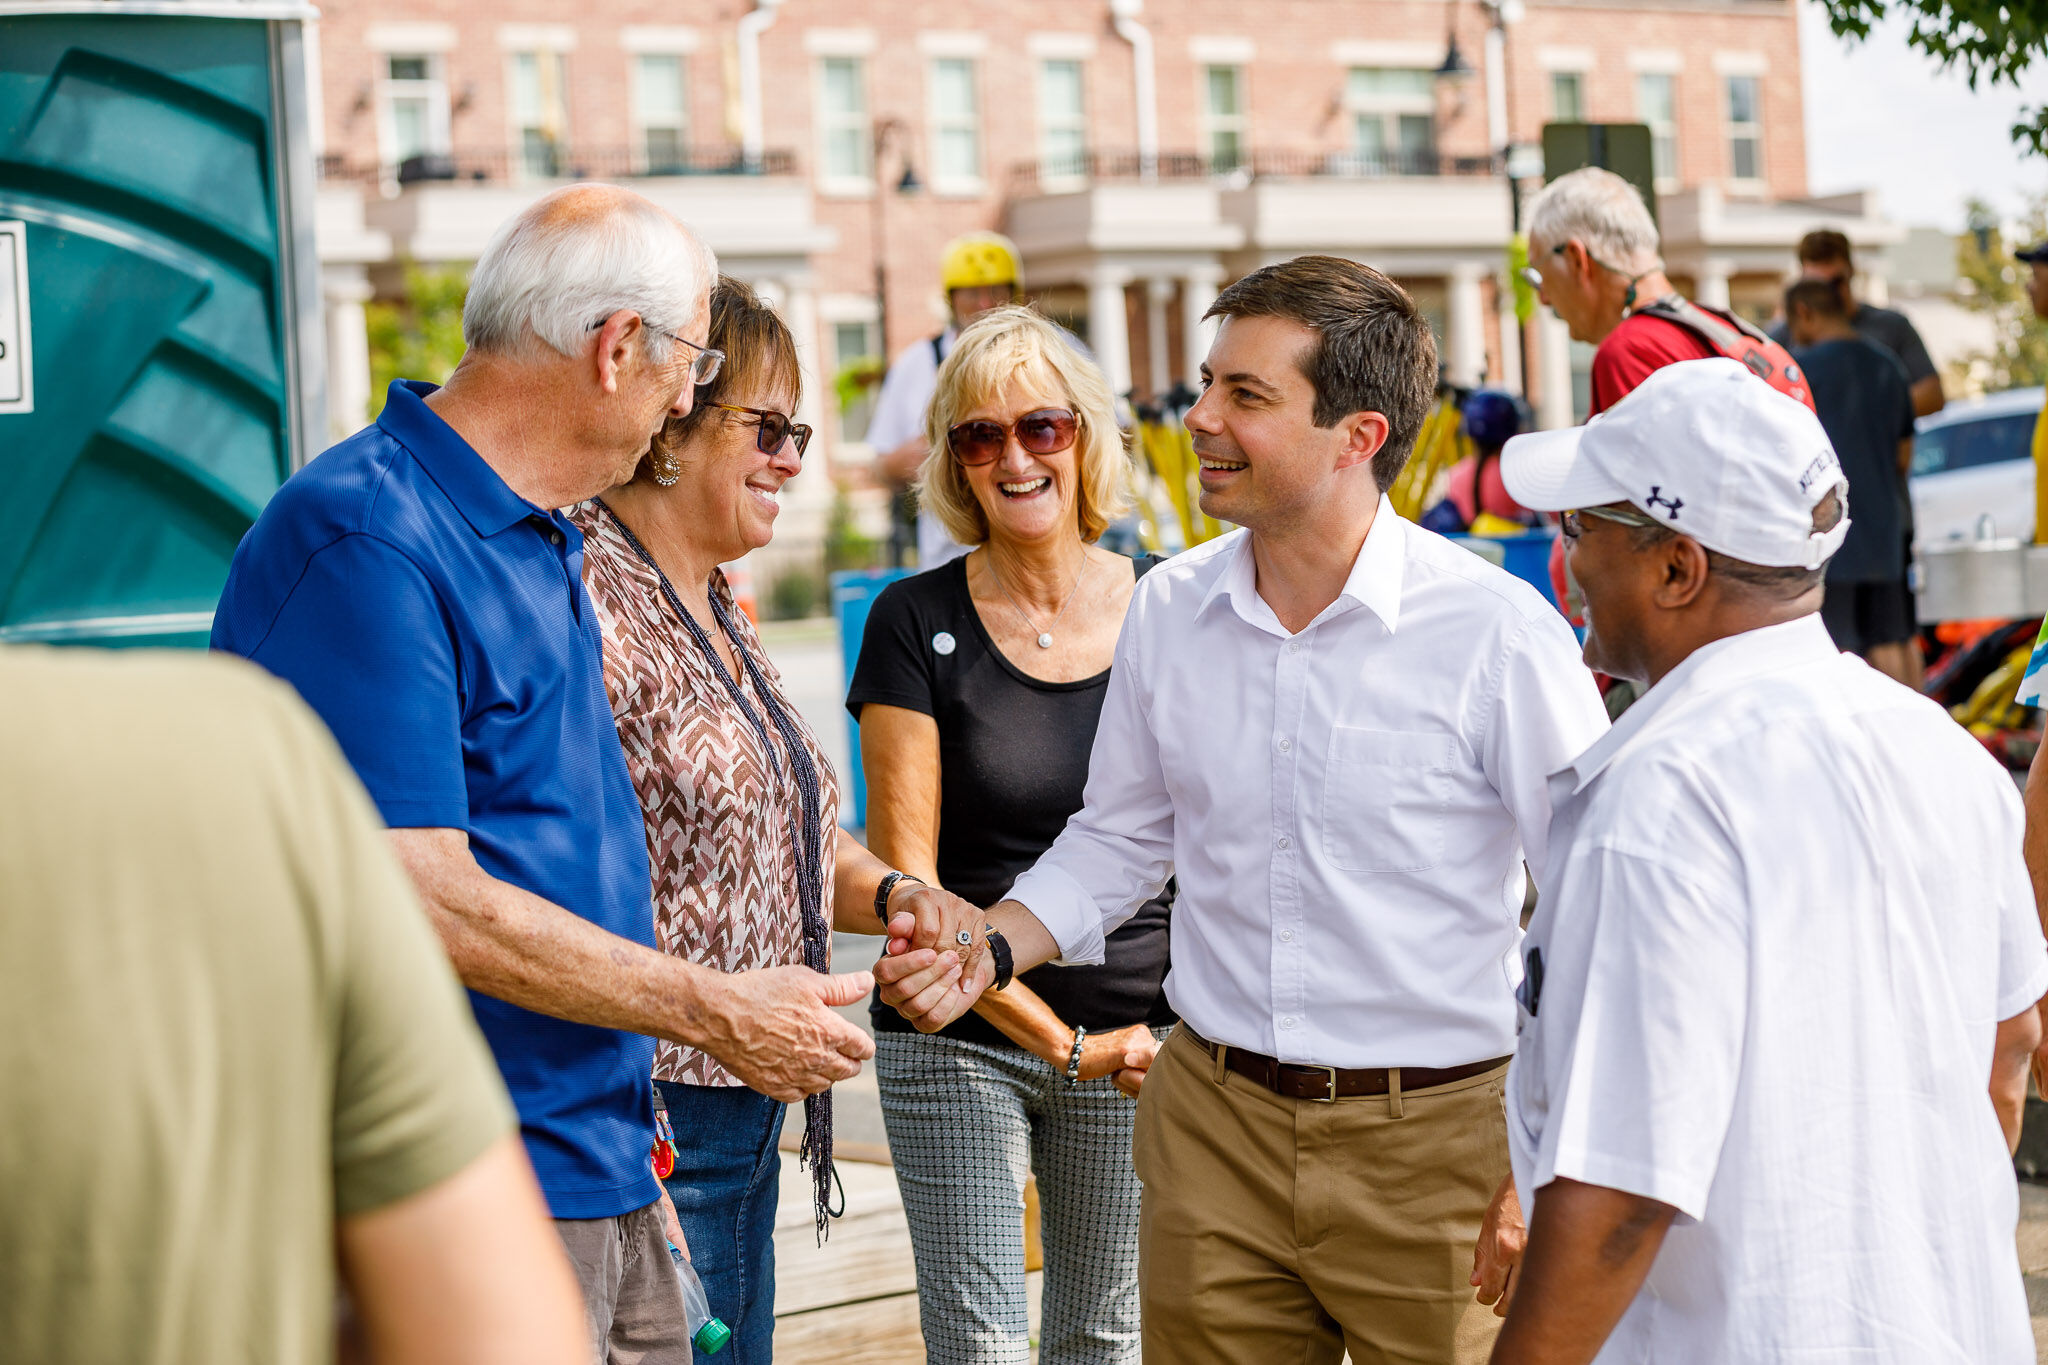 South Bend, Indiana mayor Pete Buttigieg shakes hands with voters on the campaign trail